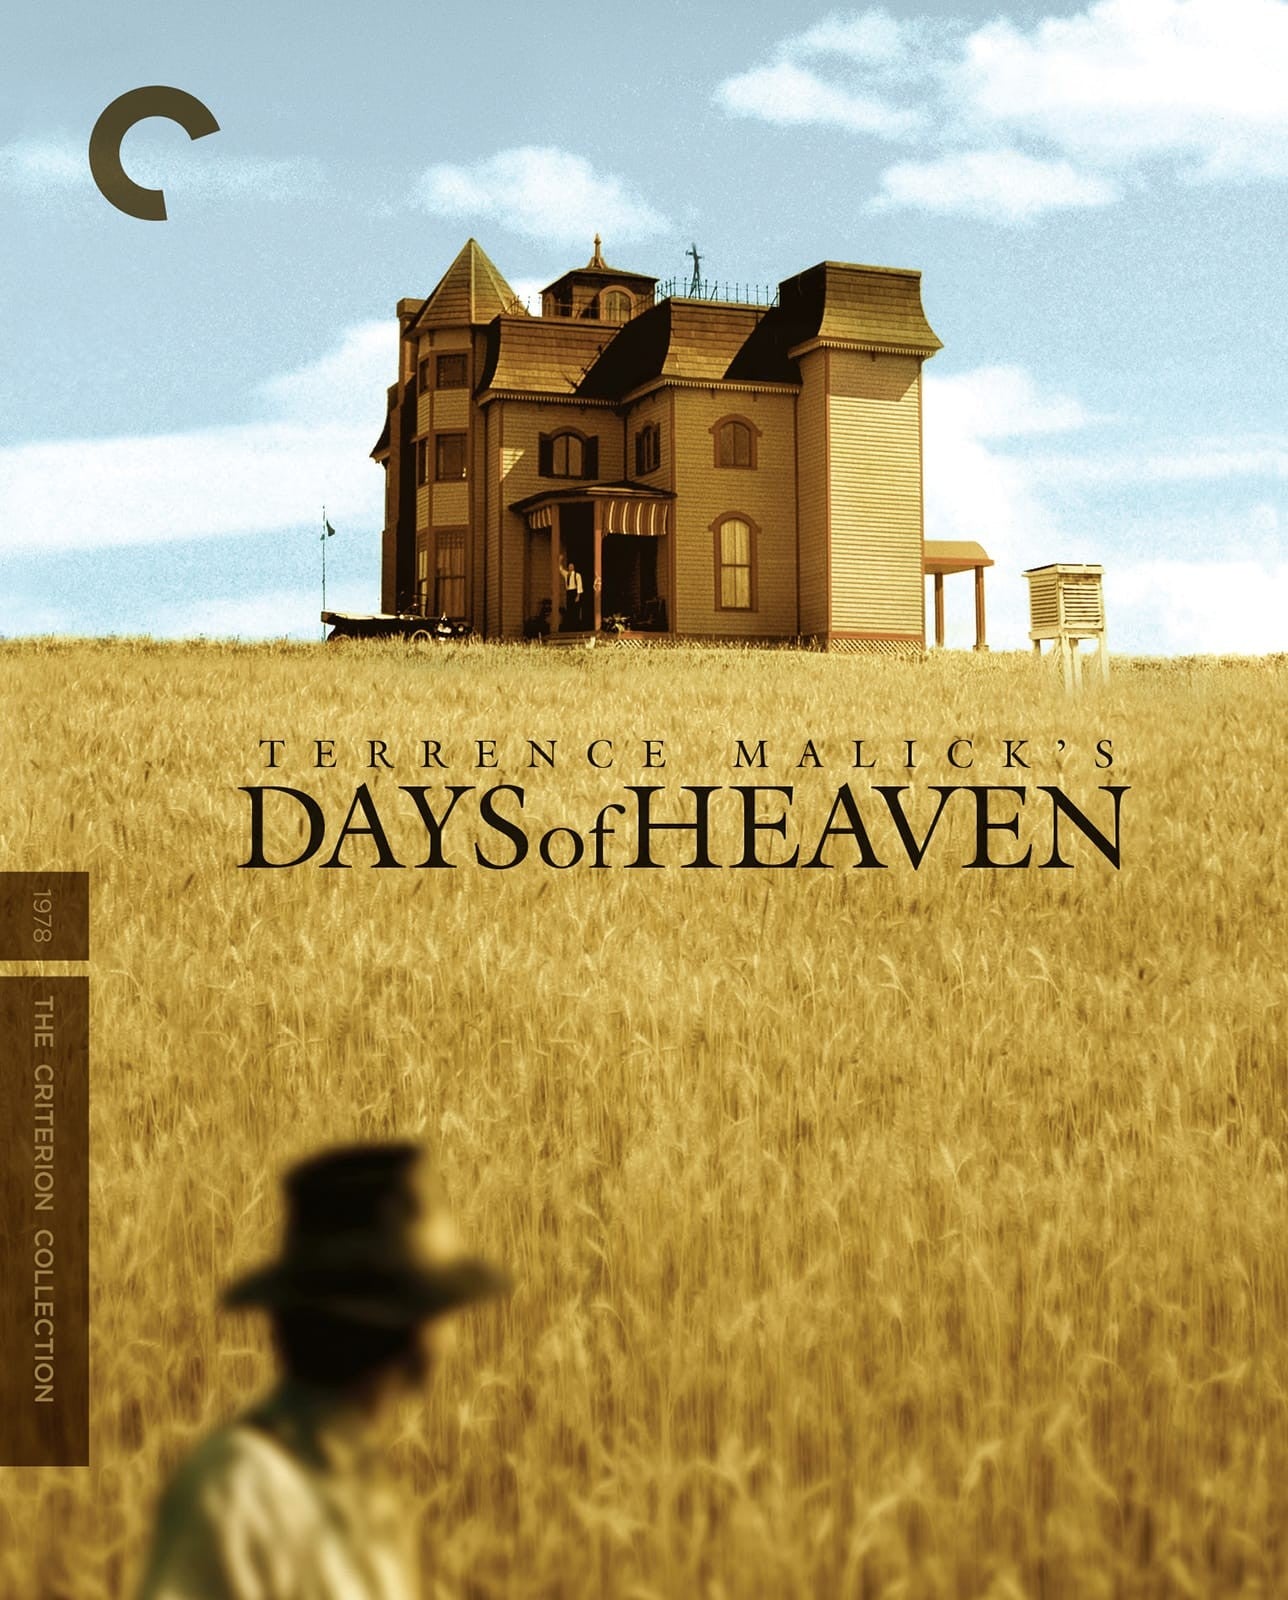 Days of Heaven 4K UHD + Blu-ray (Criterion Collection)